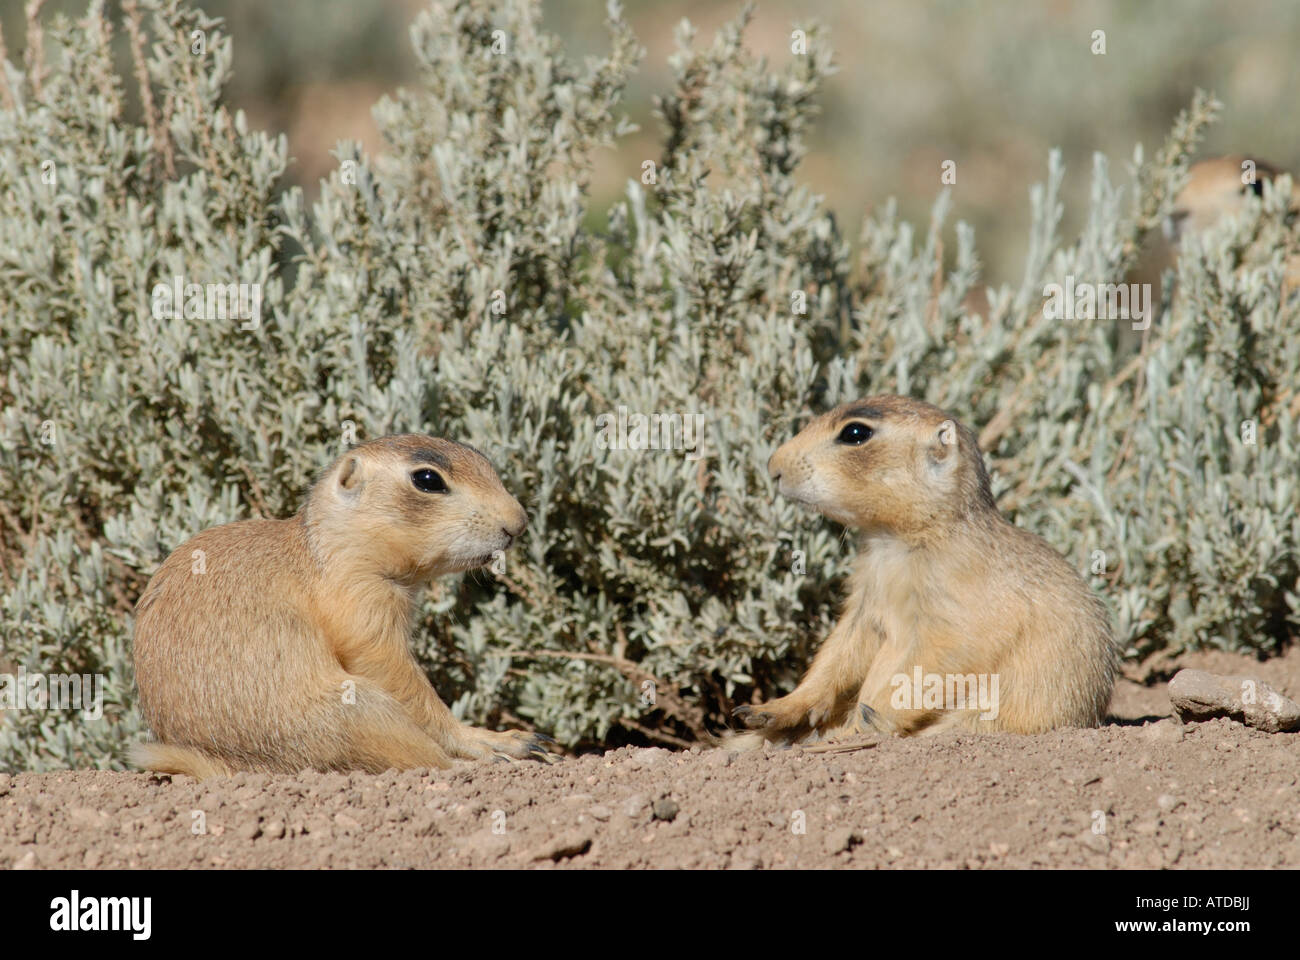 Stock photo of two Utah prairie dog pups sitting facing each other. Stock Photo